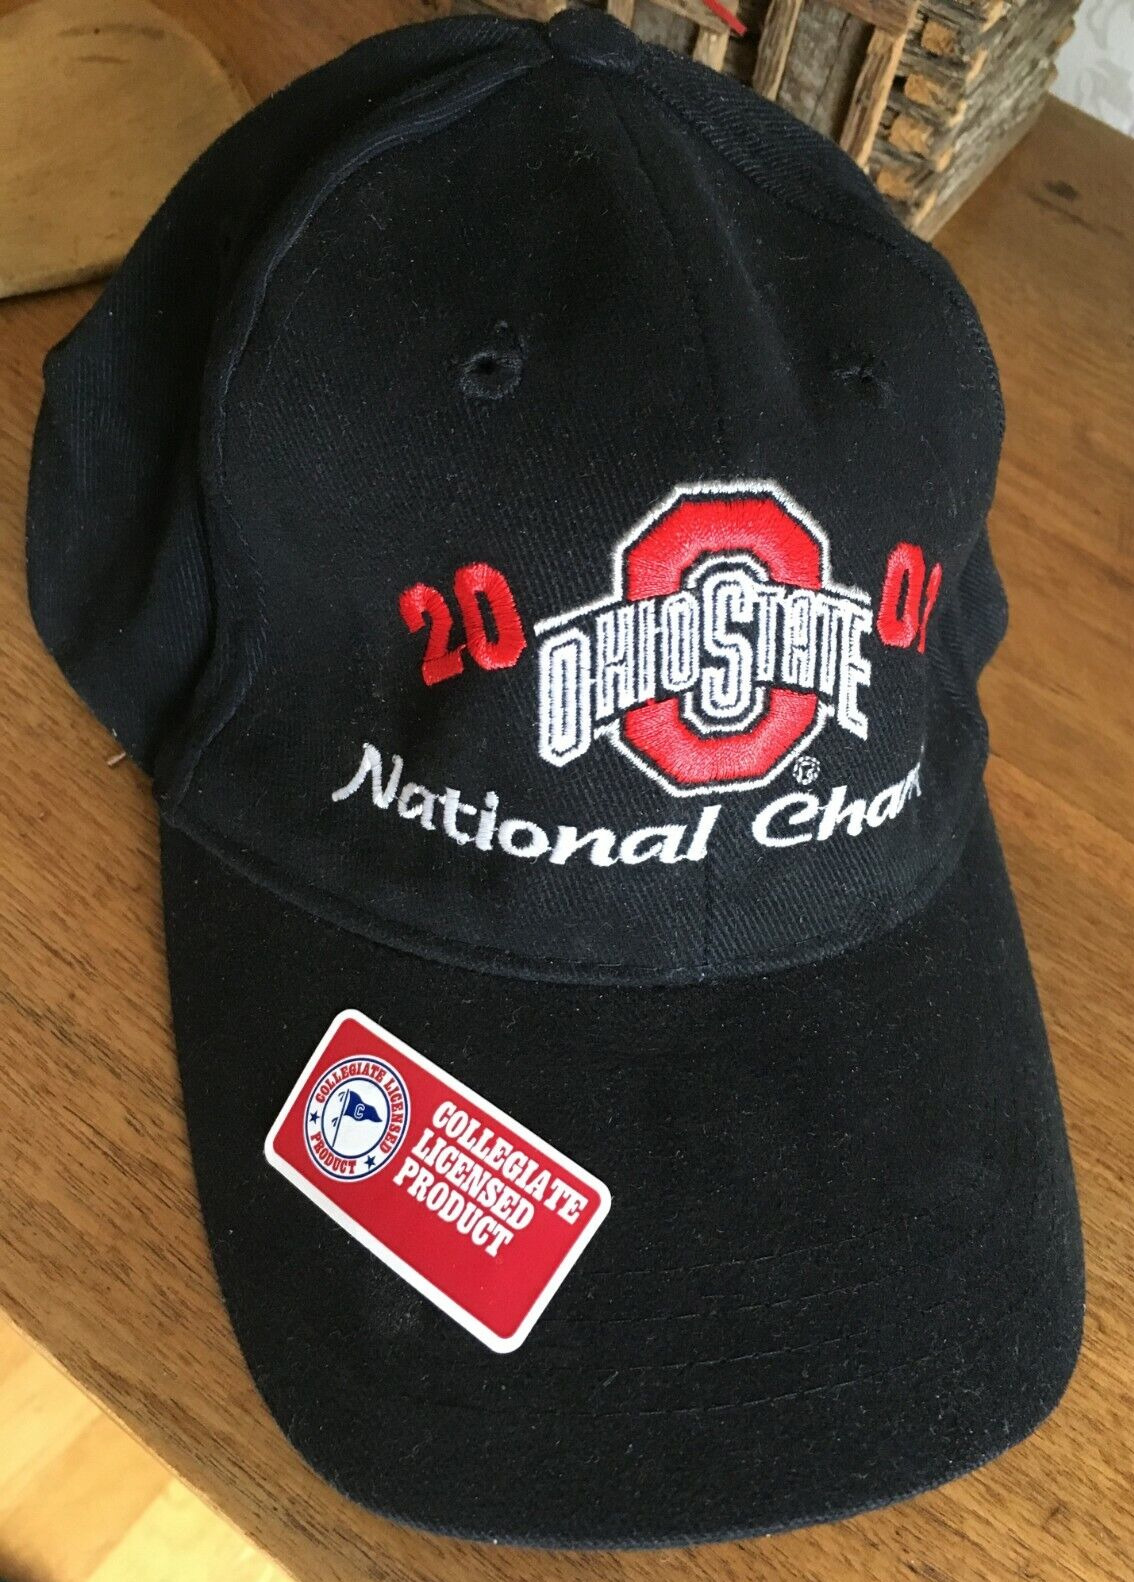 NOS New Old Stock 2002 National Champions OHIO STATE BUCKEYES FOOTBALL Hat Cap